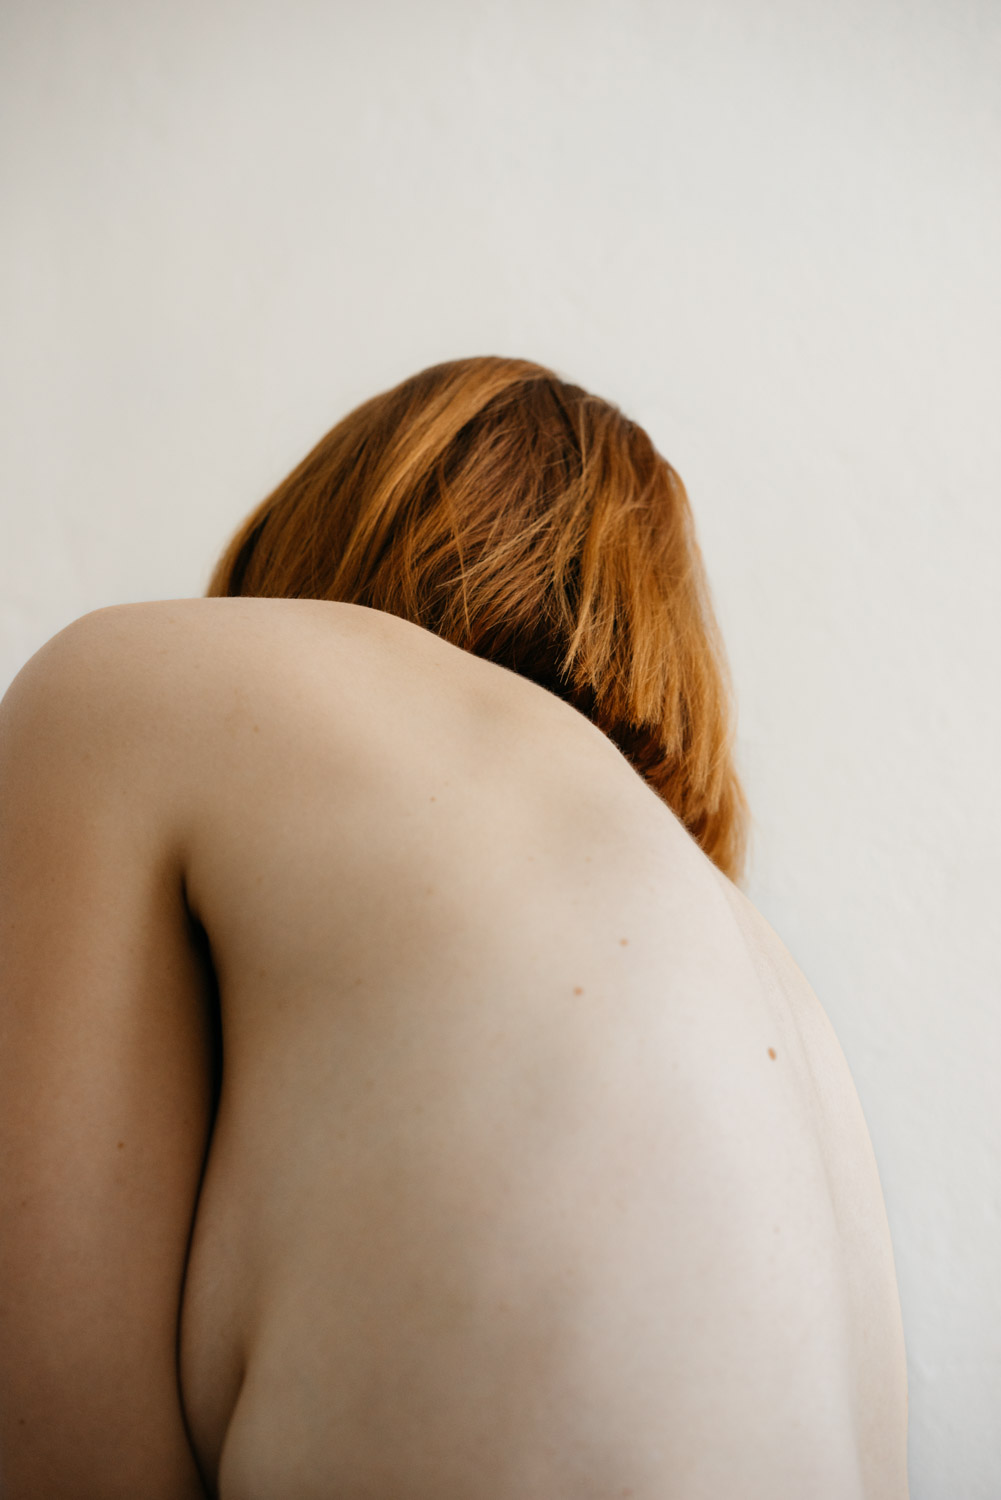 Delphine Millet Fagments - Body back red hair vulnerable dance human condition lonely photography minimalist graphic delicate - Art conceptual photographer in Berlin